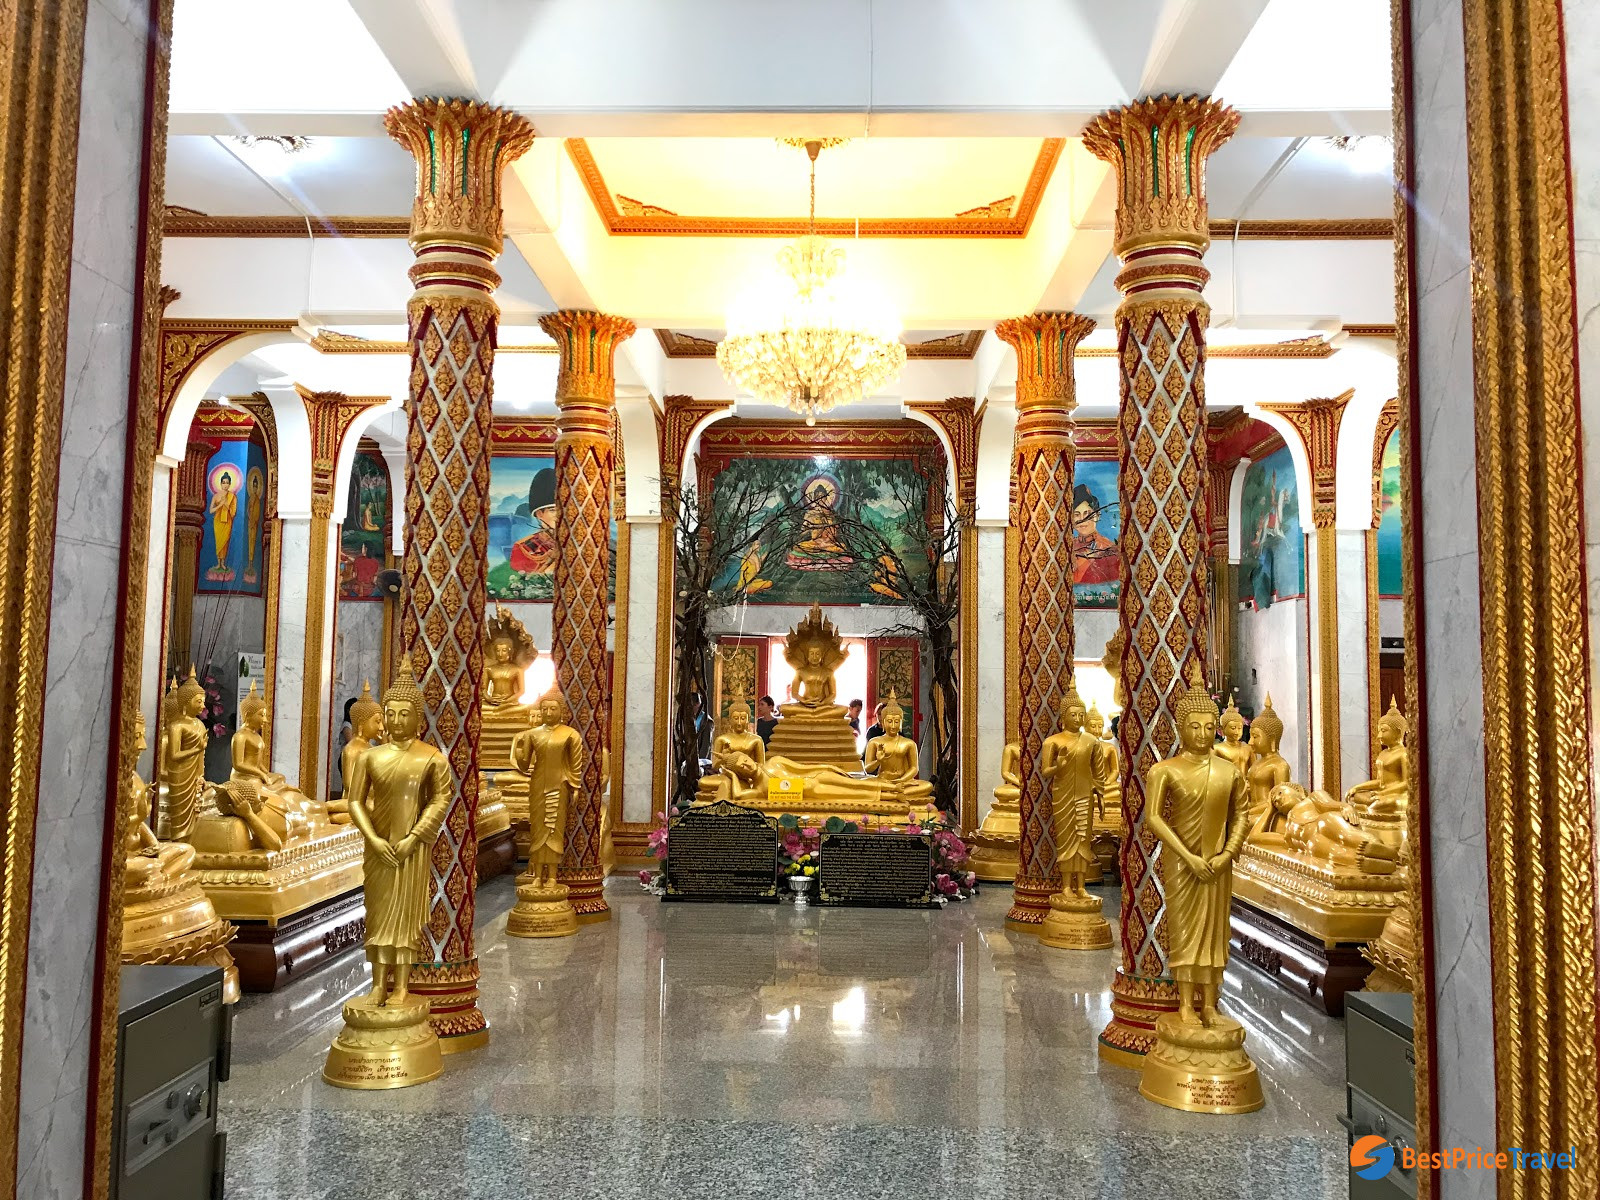 The interior of Wat Chalong